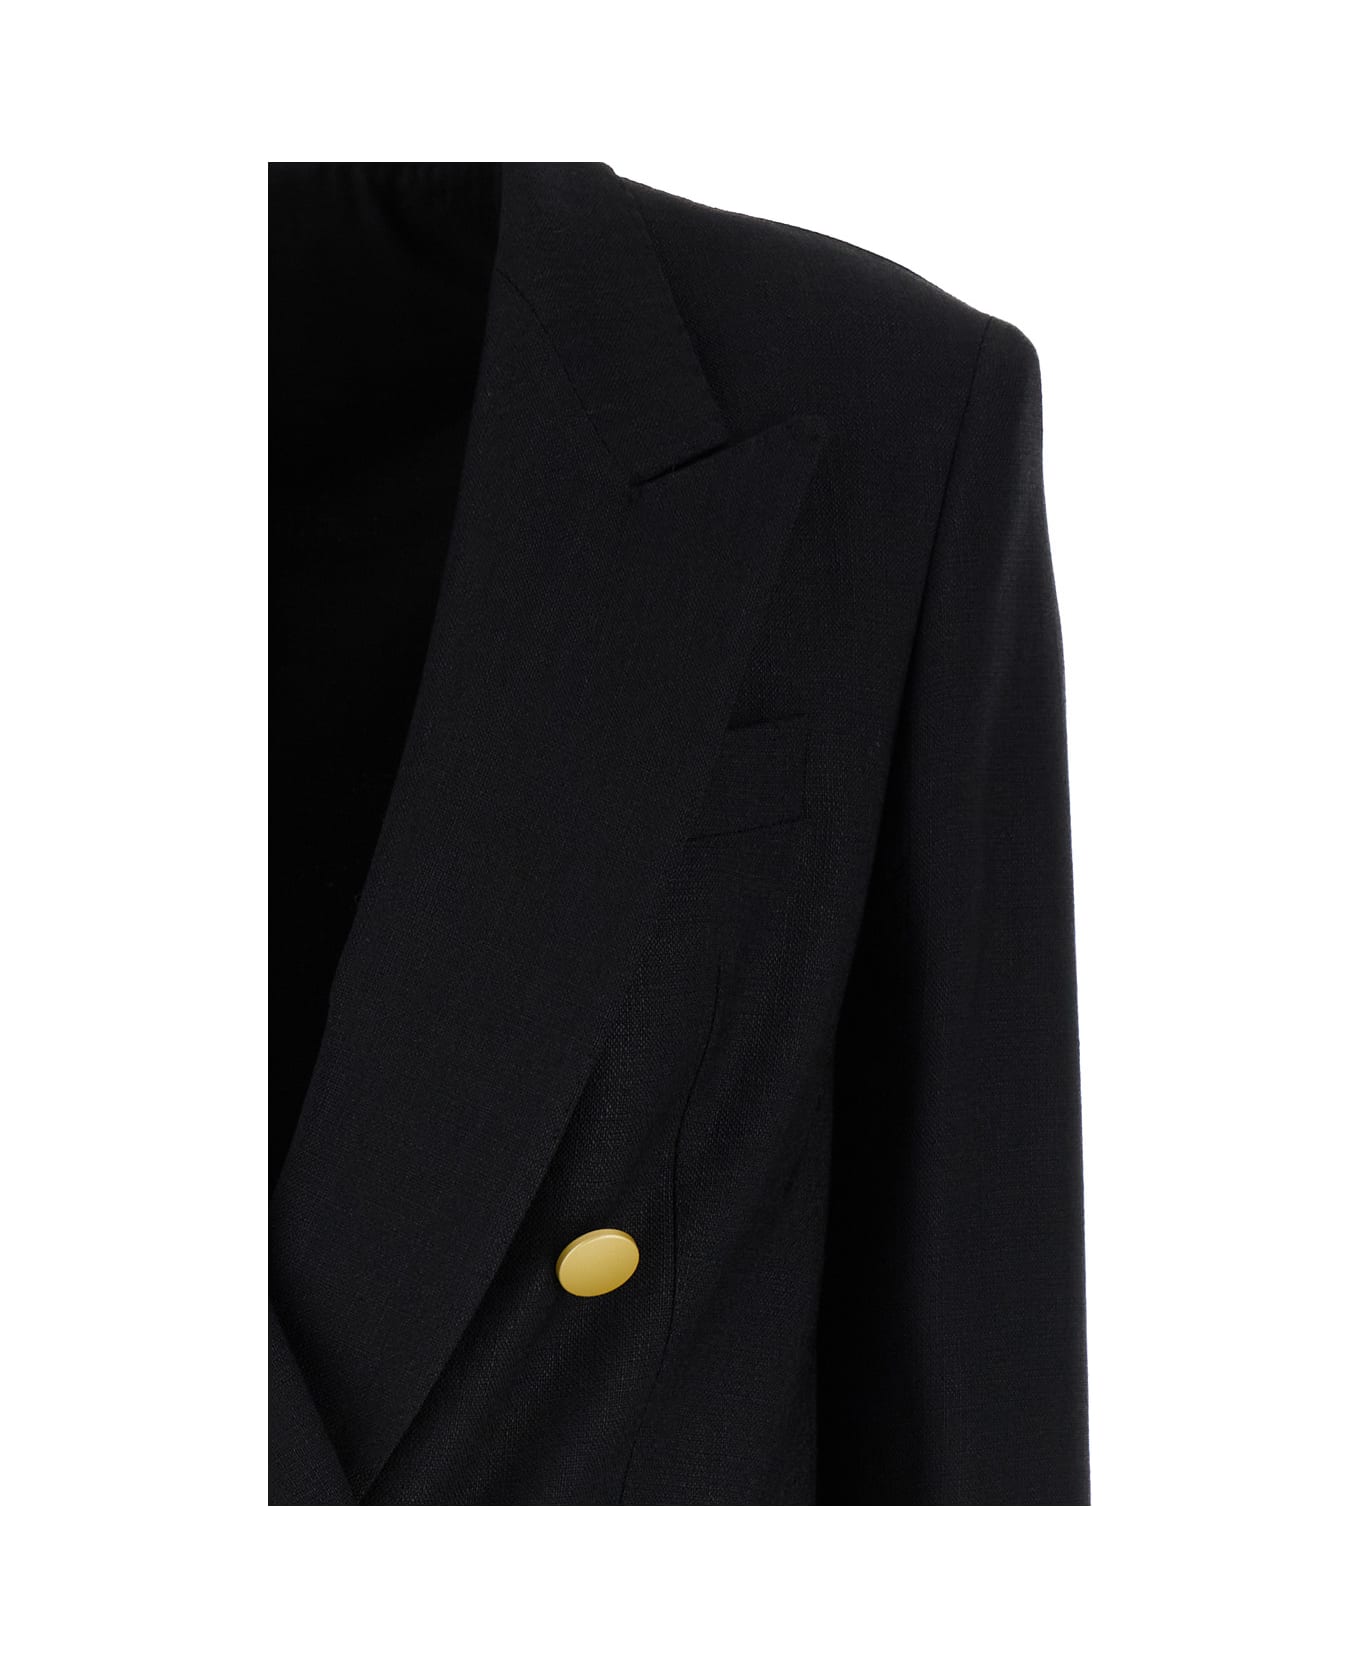 Tagliatore Black Double-breasted Blazer With Gold-tone Buttons In Viscose Blend Woman - Black ジャケット